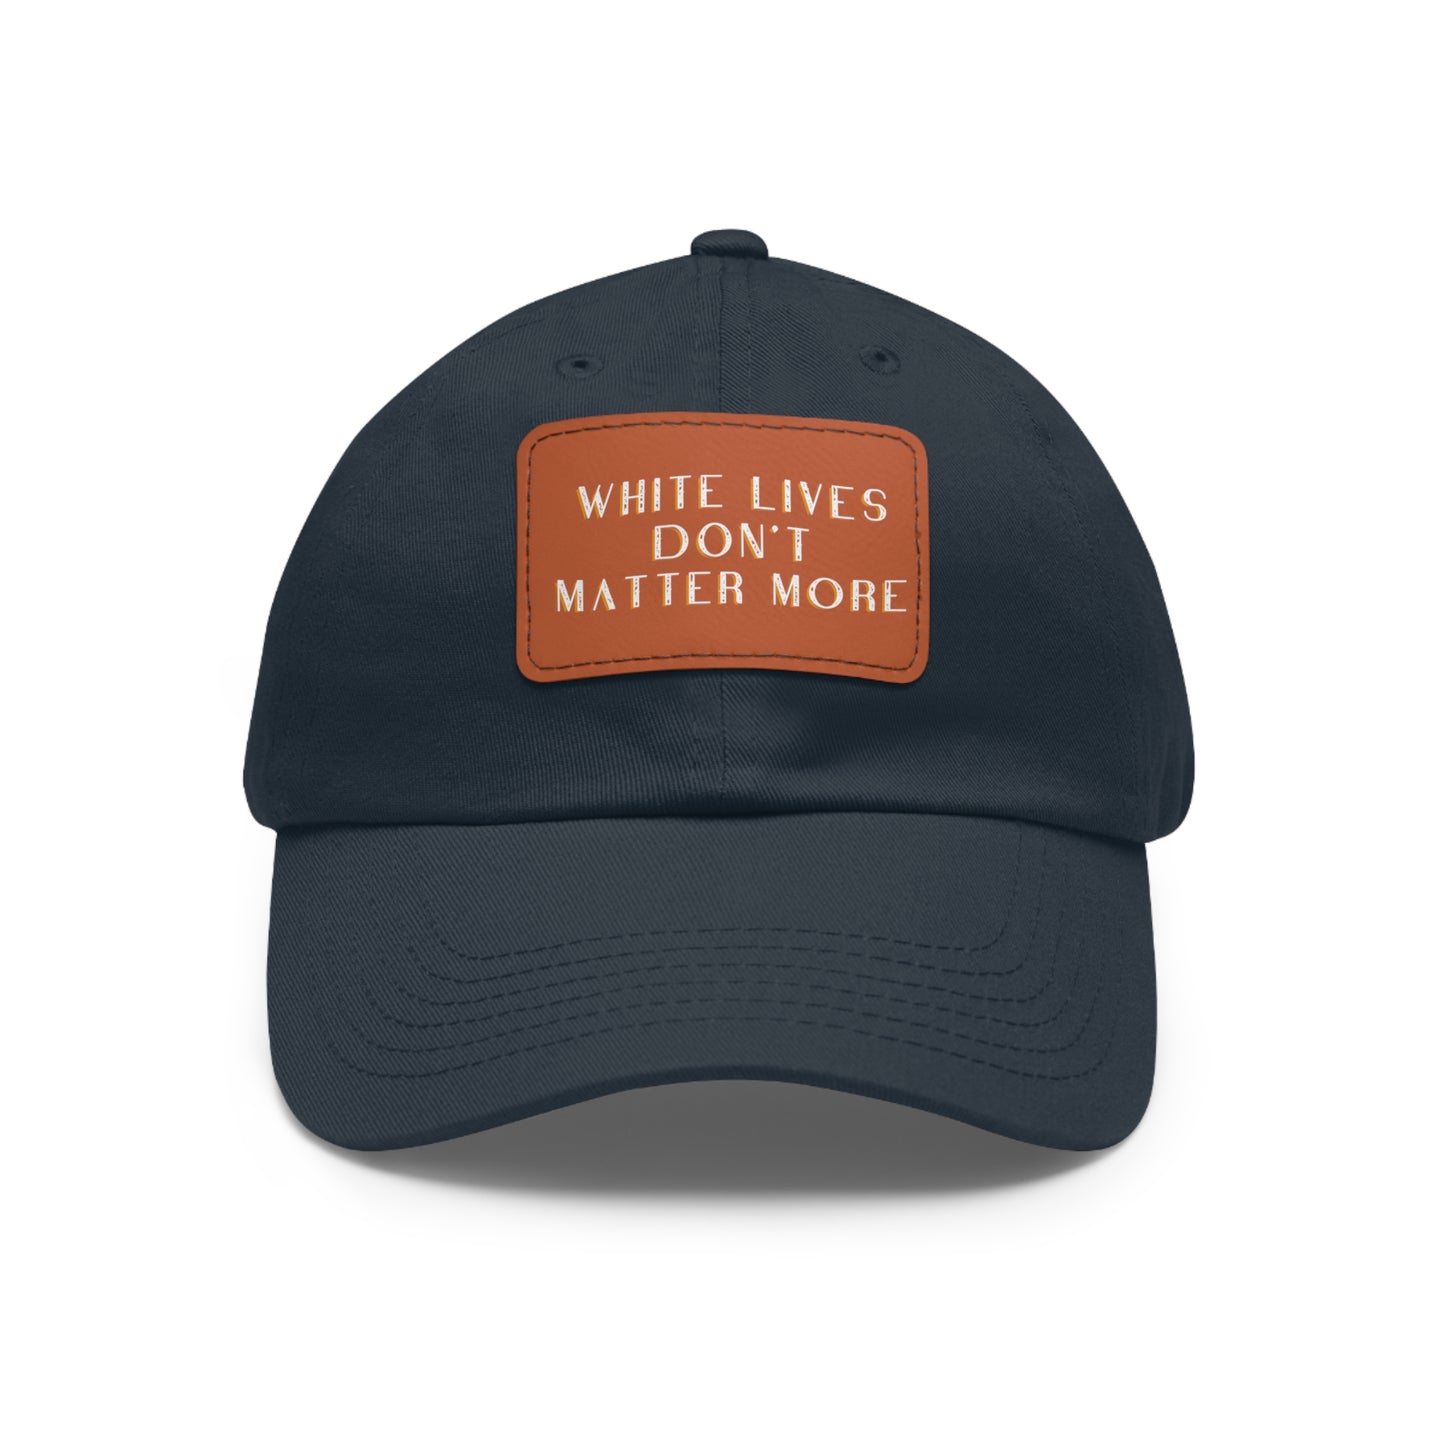 "White Lives Don't Matter More" Visor CAP with Leather Patch (Rectangle)